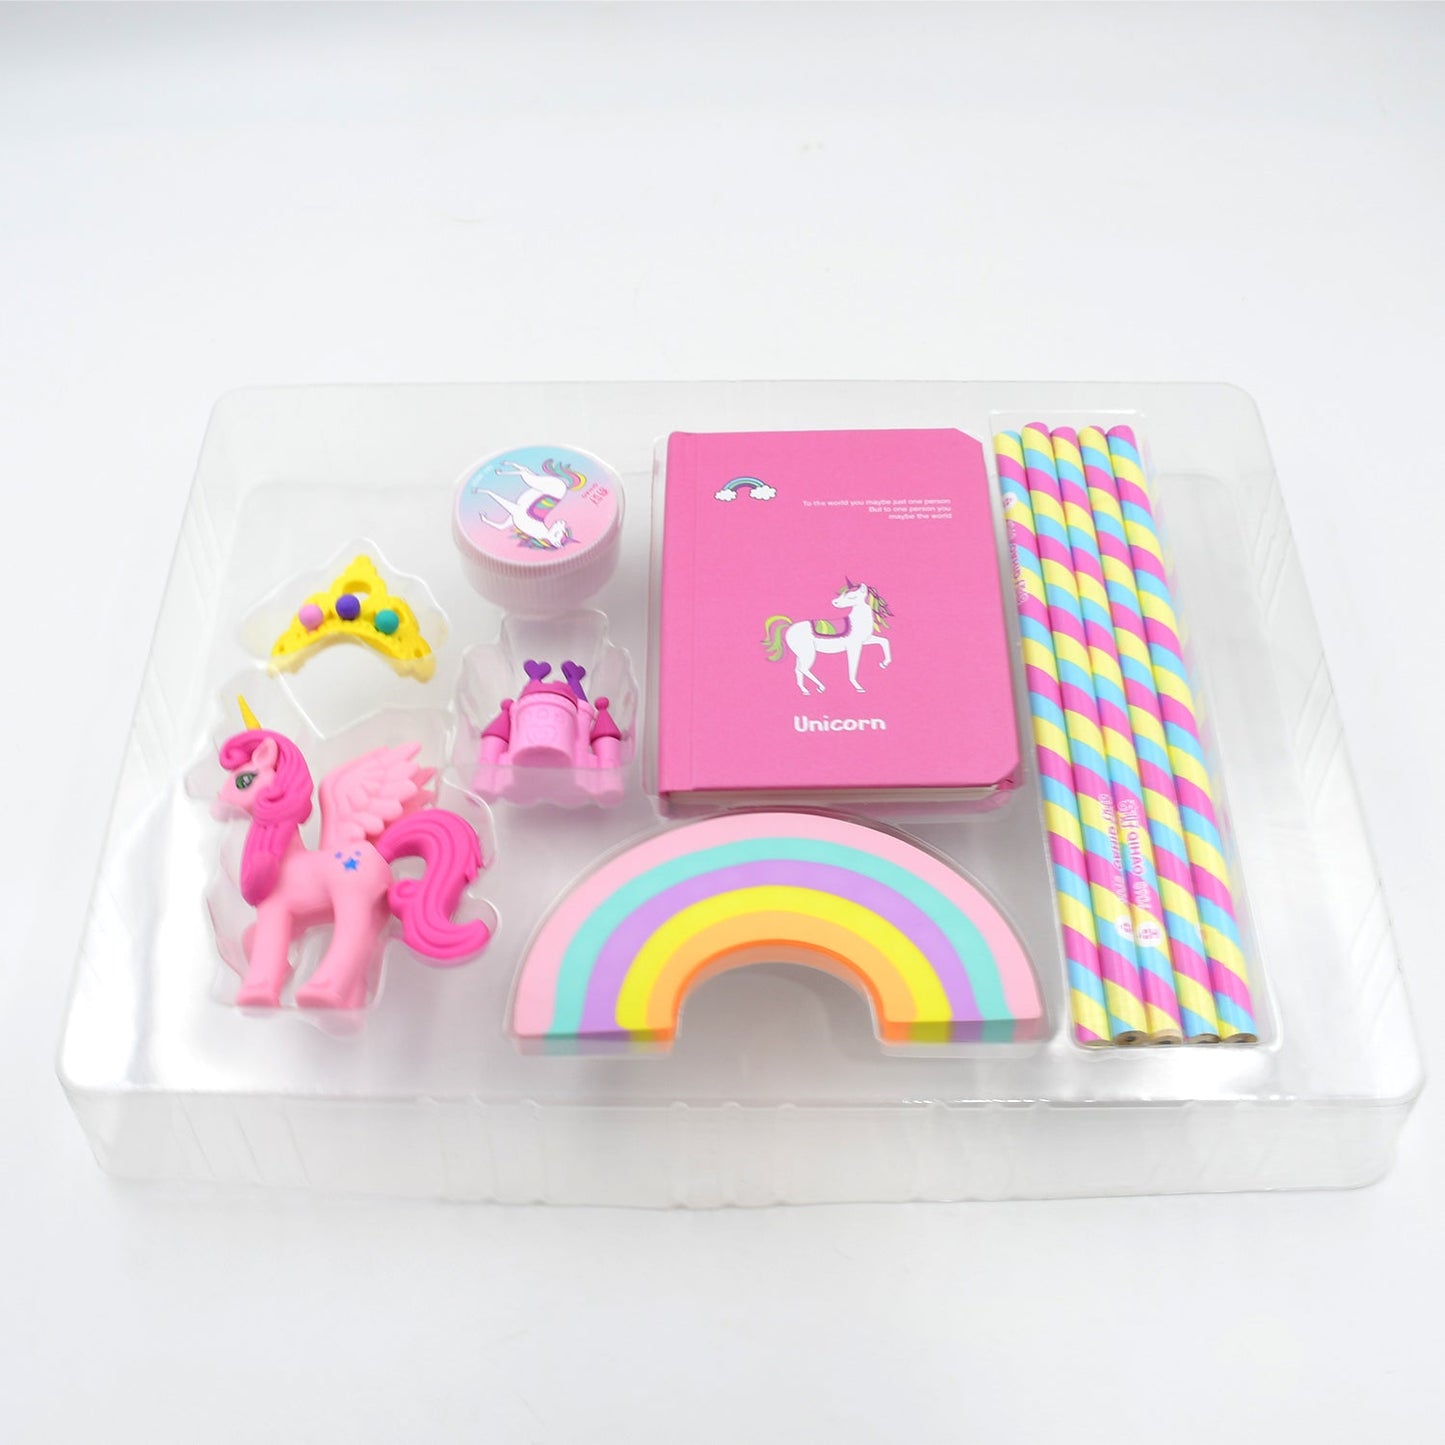 4102 Unicorn Stationery Writing Set - Unicorn Diary, Pencils, Sharpener, Unique Erasers for Girls Ages 4-11 Years Old Birthday Party Return Gift Set for Girls Kids (11 Pc Set)